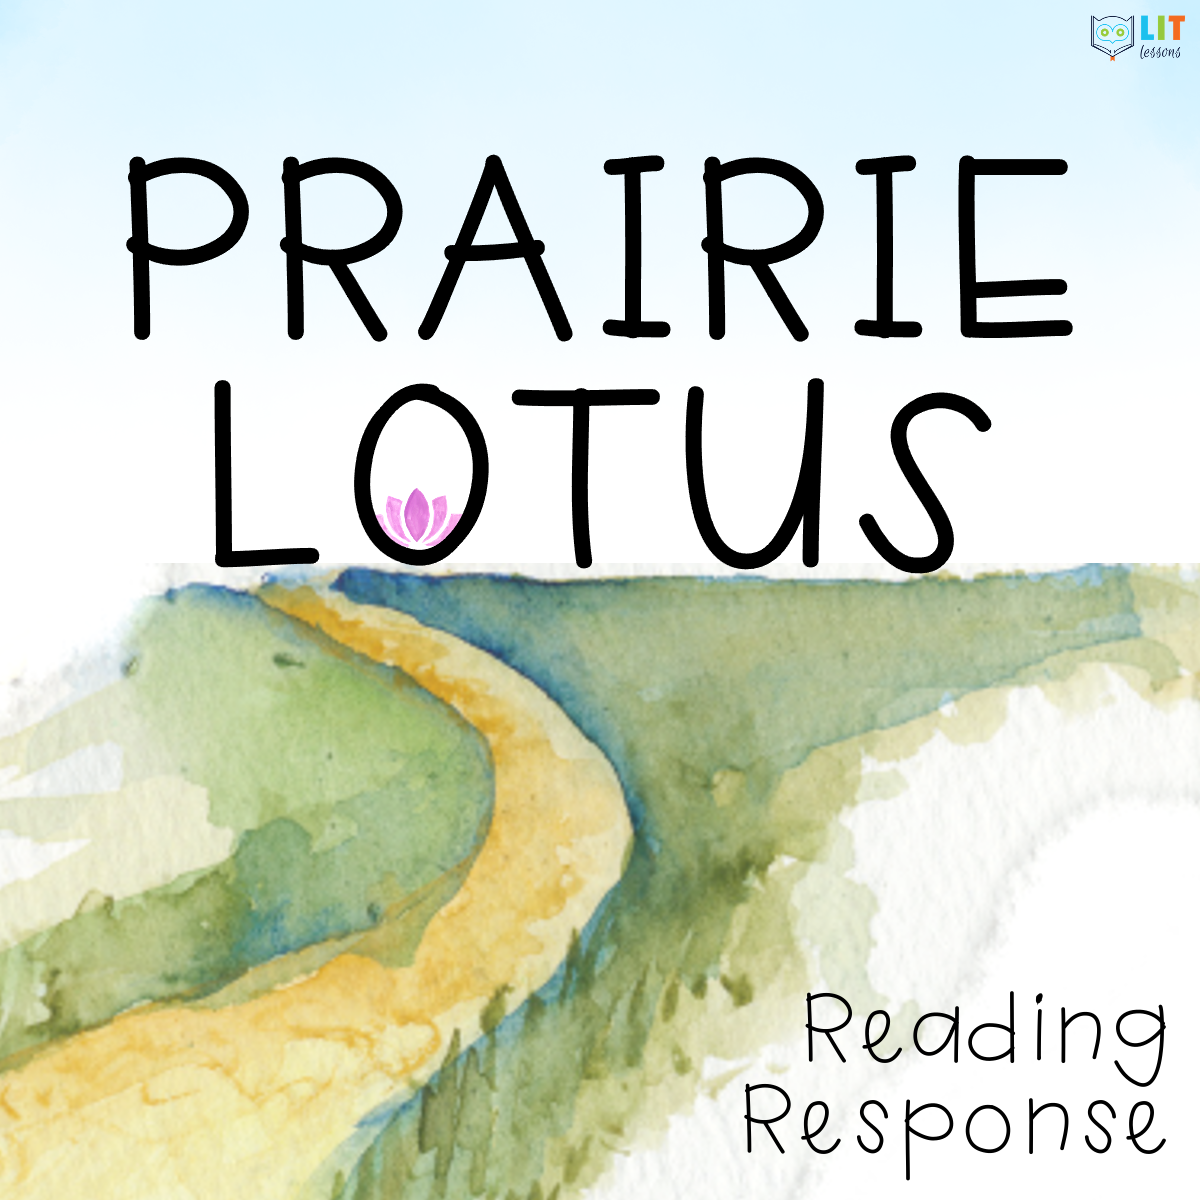 Prairie Lotus Chapter Questions